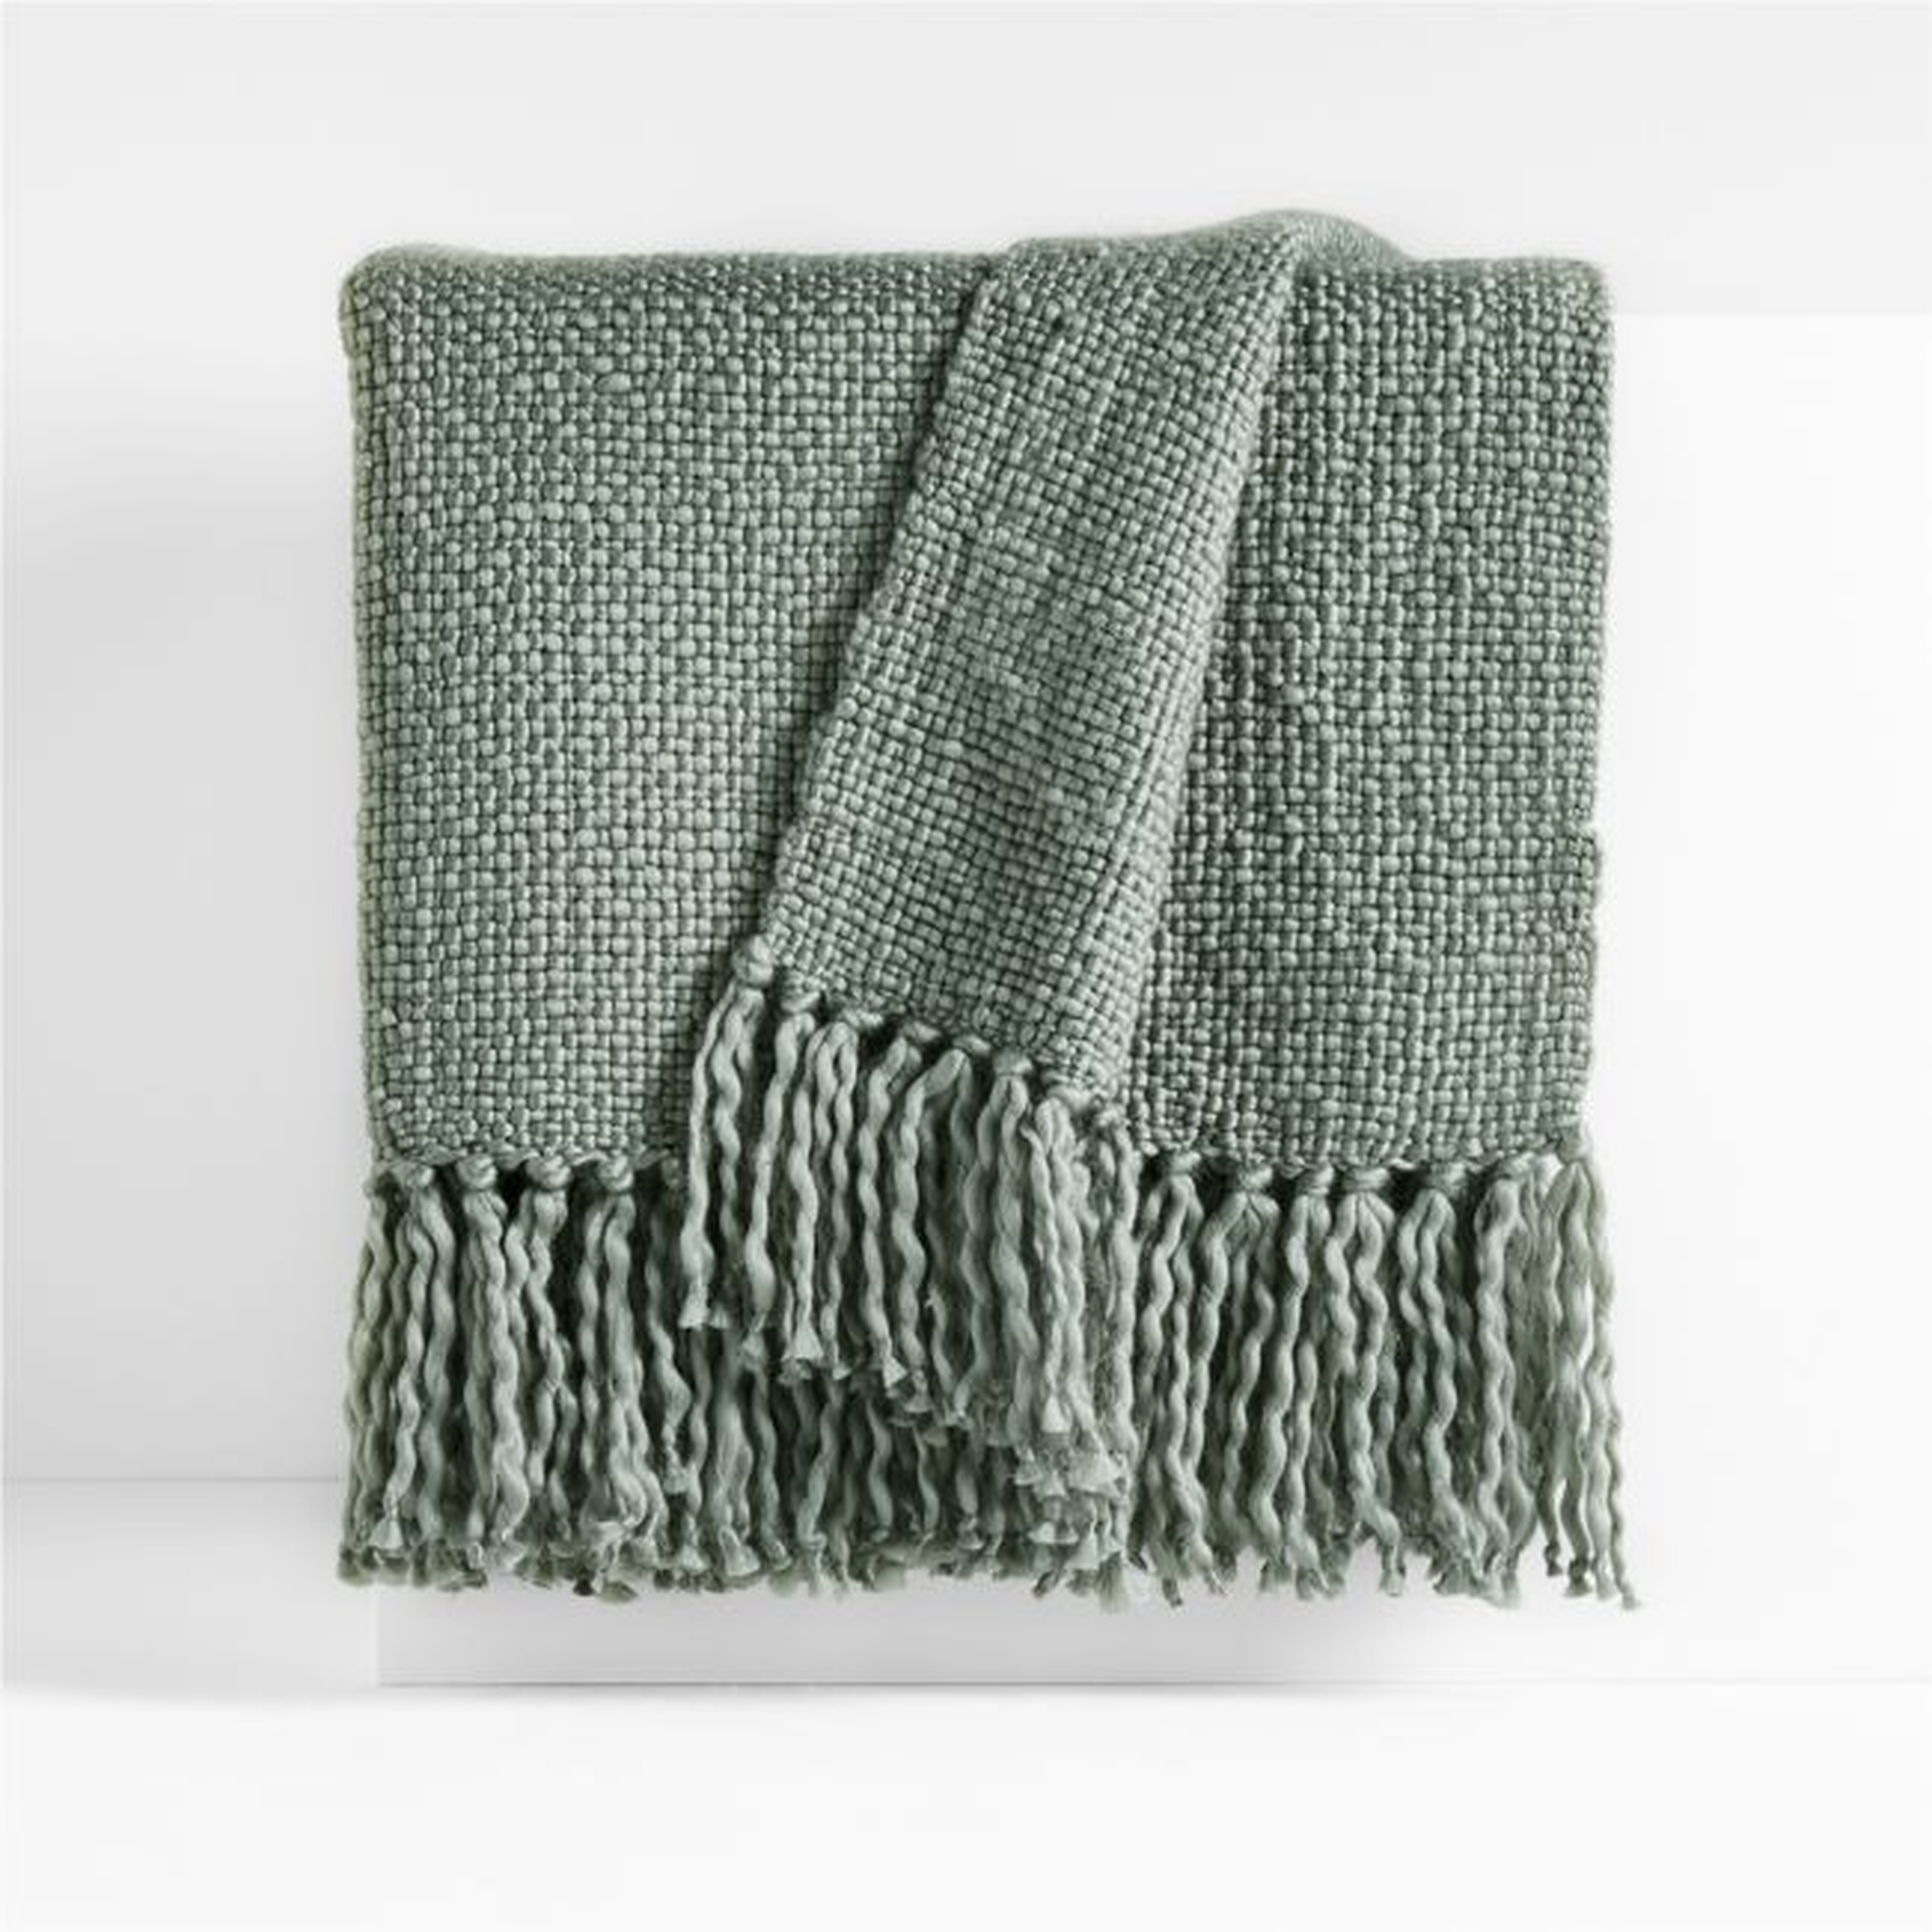 Styles Throw Blanket, Mineral, 70" x 55" - Crate and Barrel